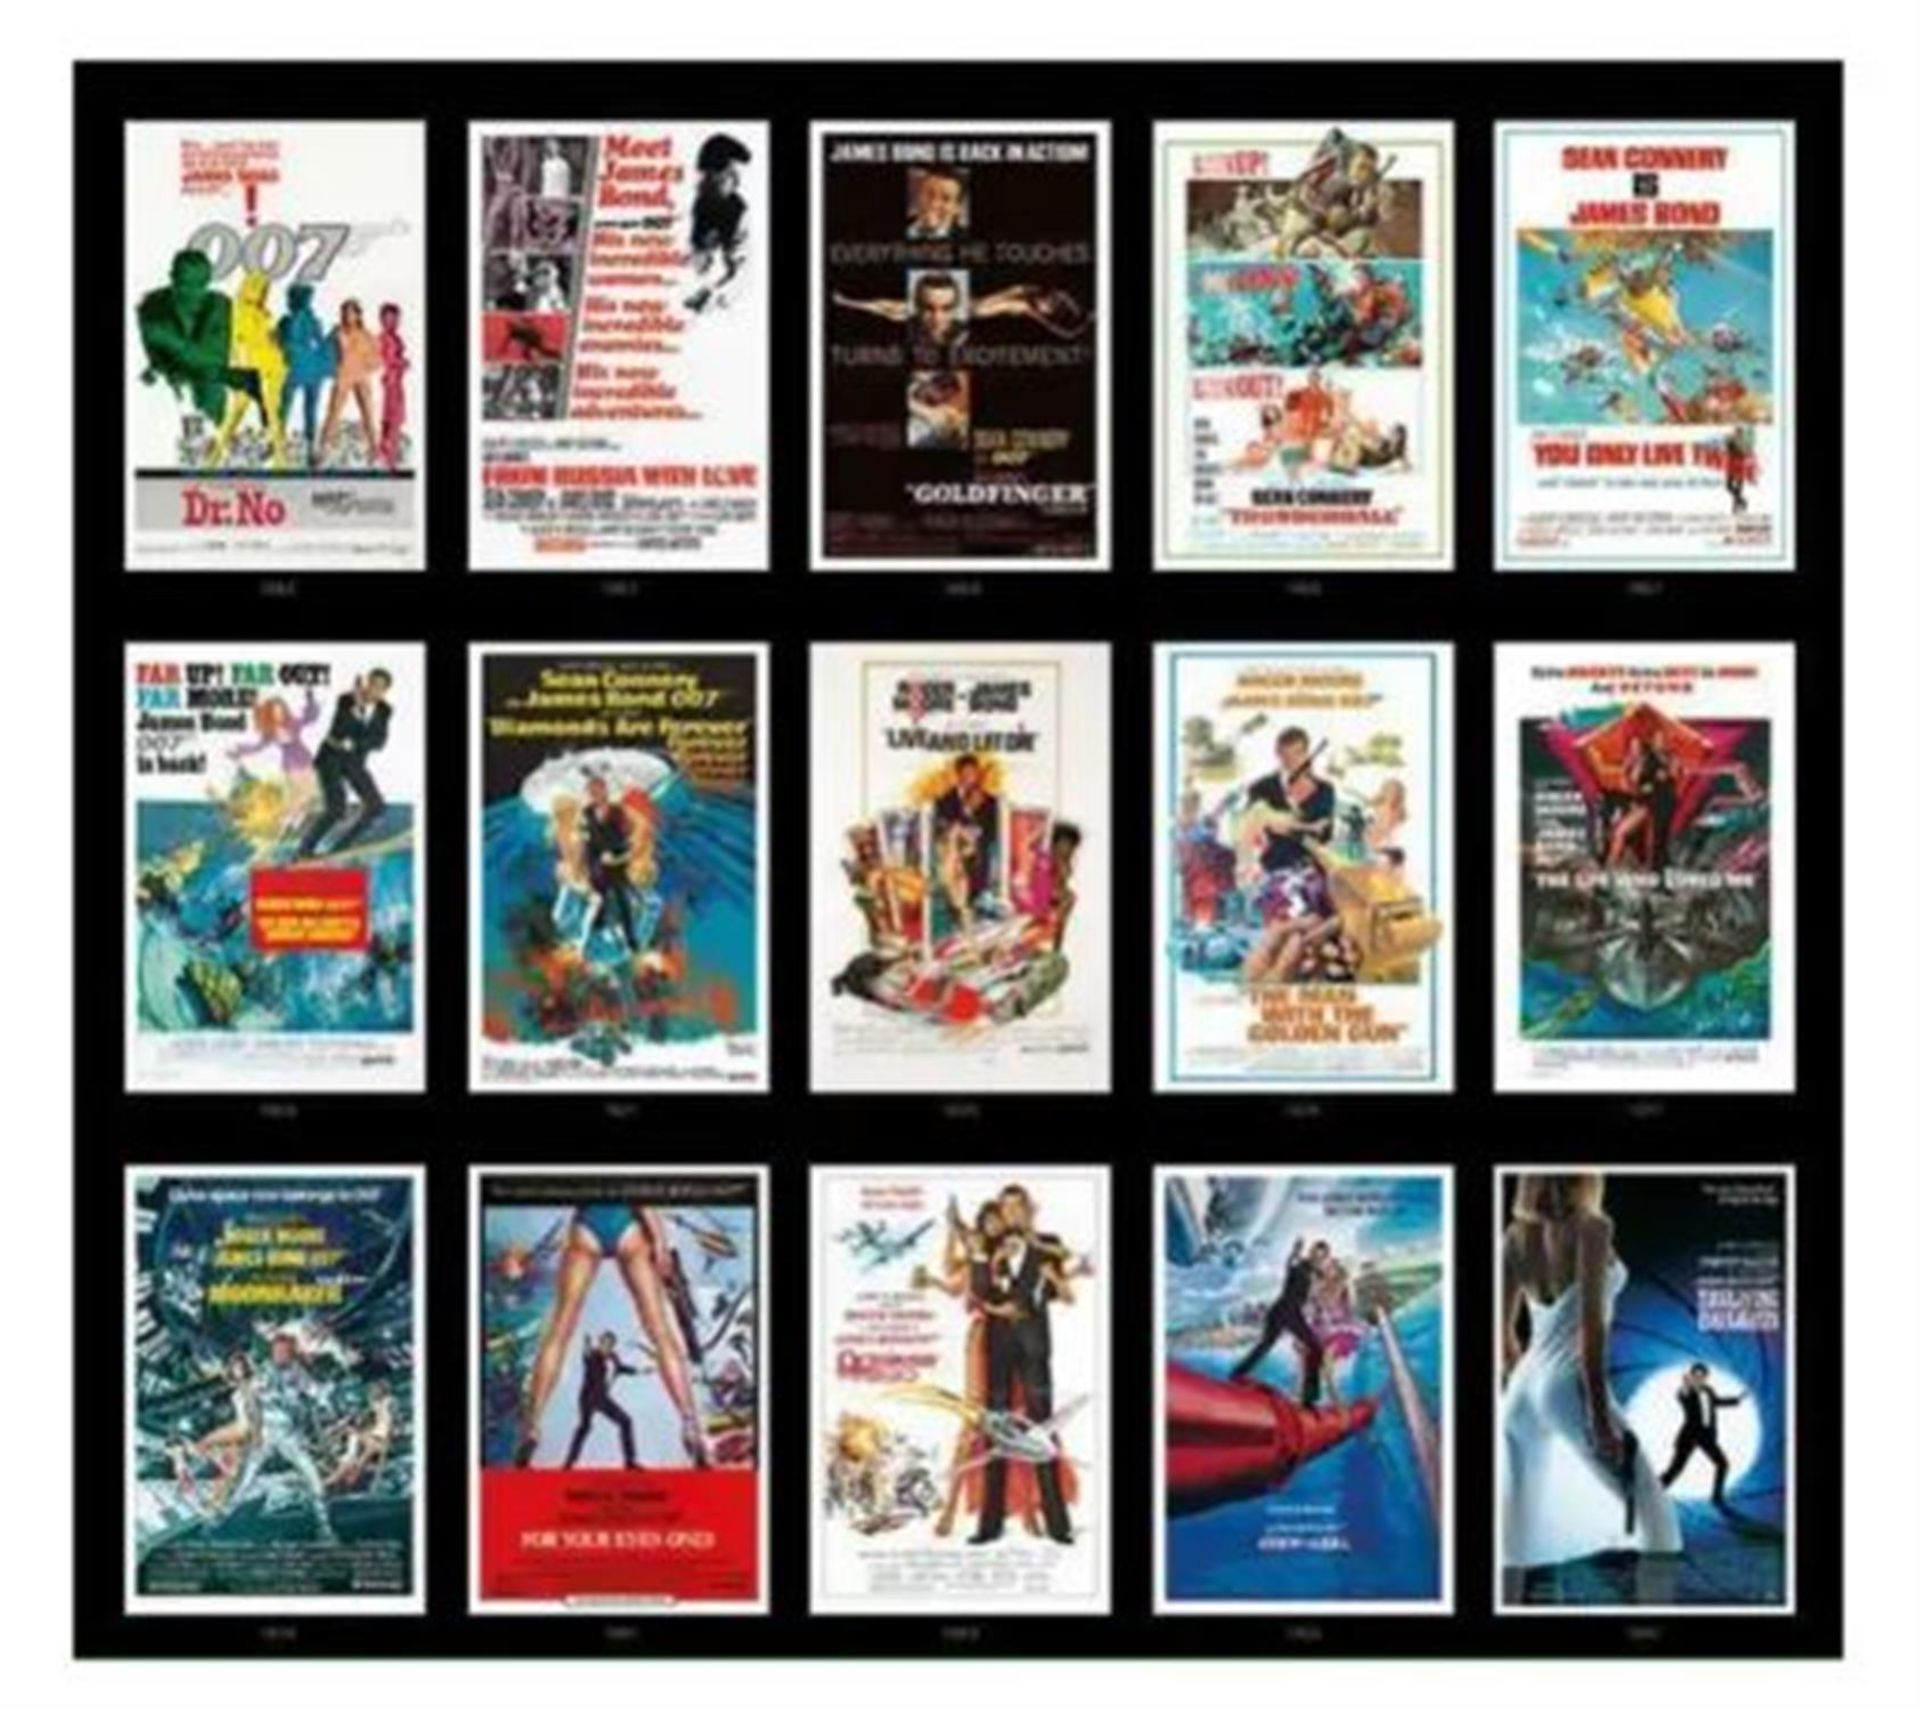 Every James Bond Poster From 1962 to 1987 Plus Multiple Rare Designs as Issued by EON Productions* - Image 2 of 2